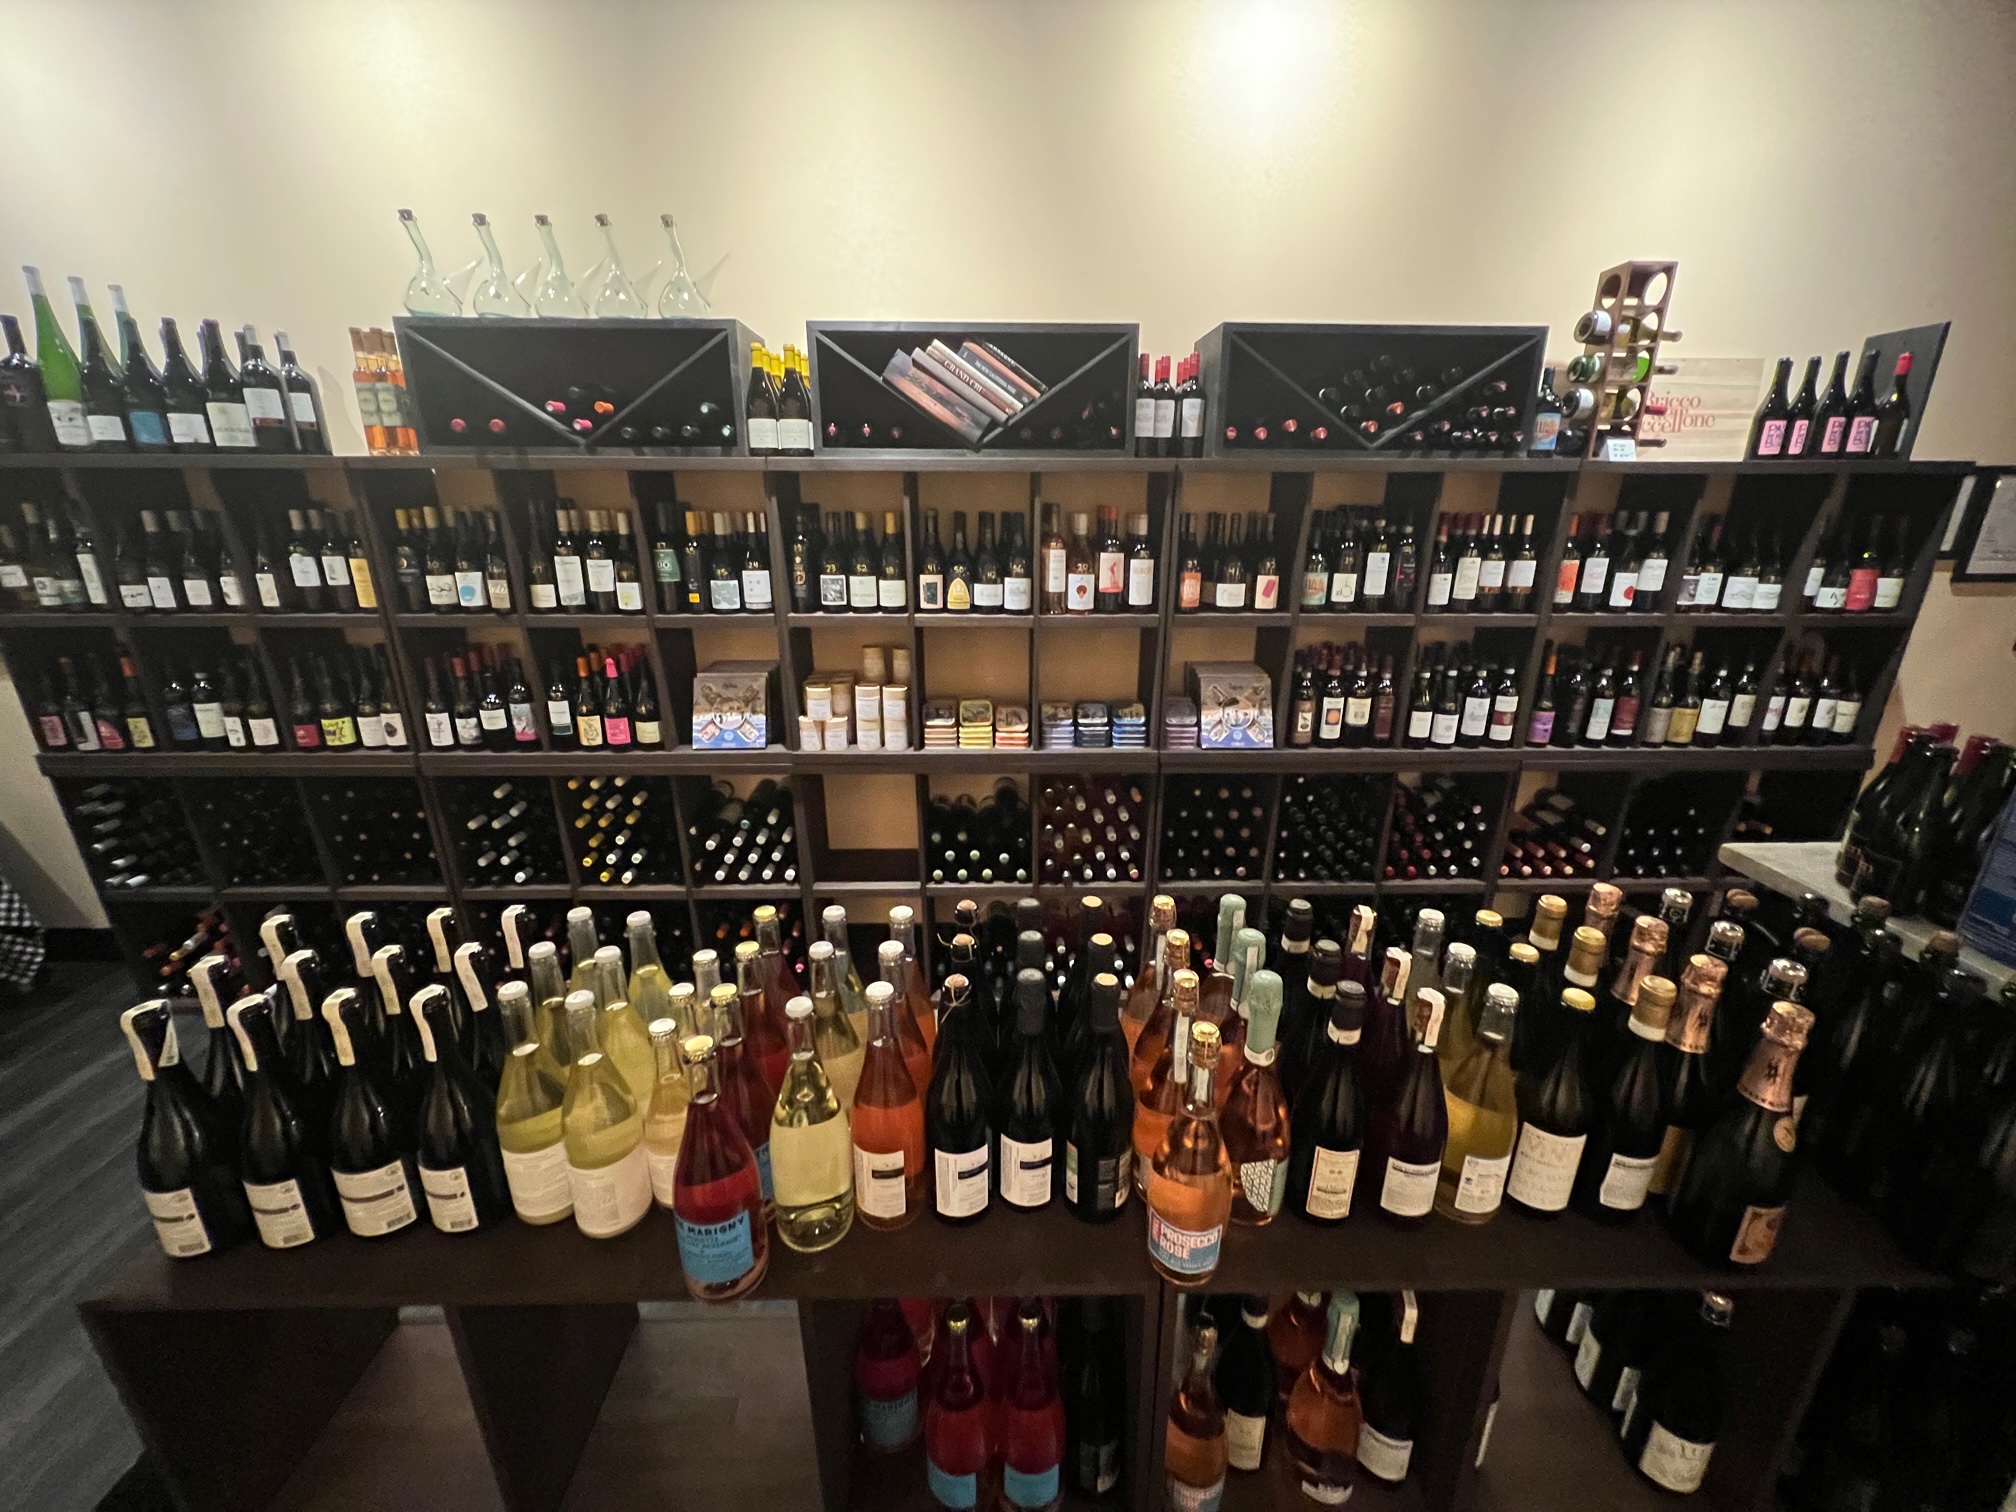 Inside Ladro Enoteca, there are shelves of wine. Photo by Alyssa Buckley.